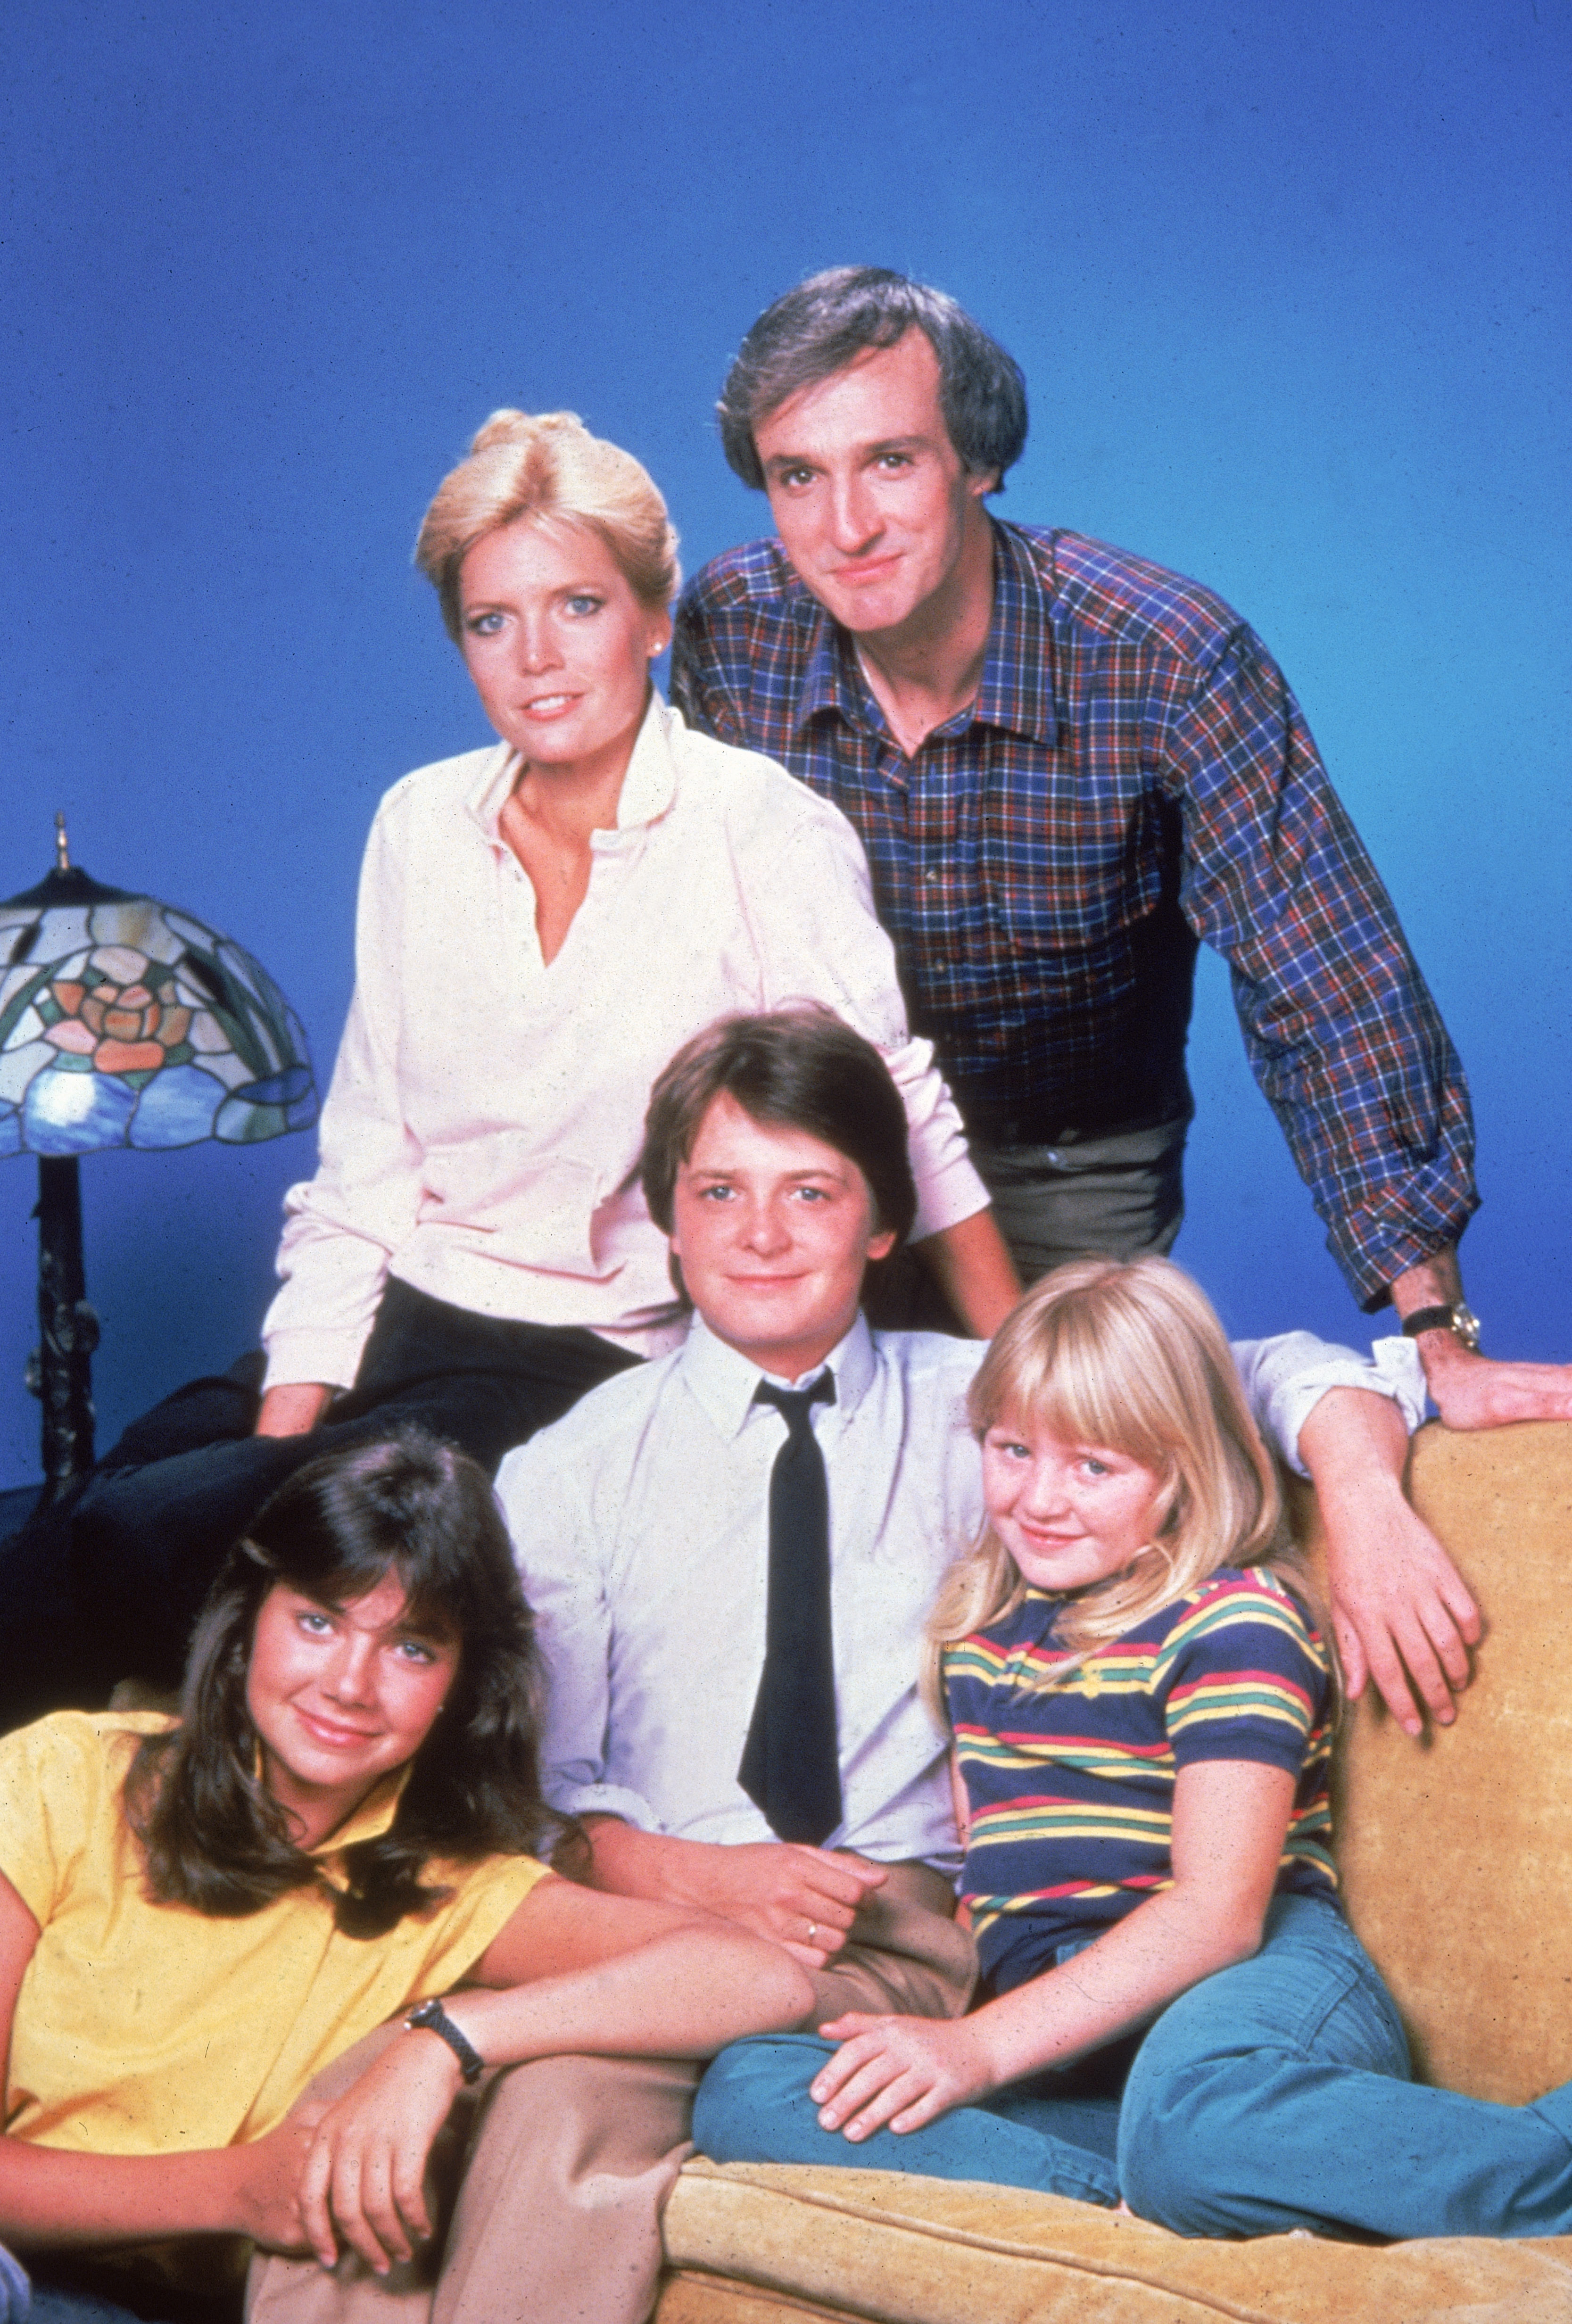 American actors Meredith Baxter Birney and Michael Gross; sitting, left to right, American actress Justine Bateman, Canadian-born actor Michael J. Fox, and American actress Tina Yothers circa 1982 | Source: Getty Images